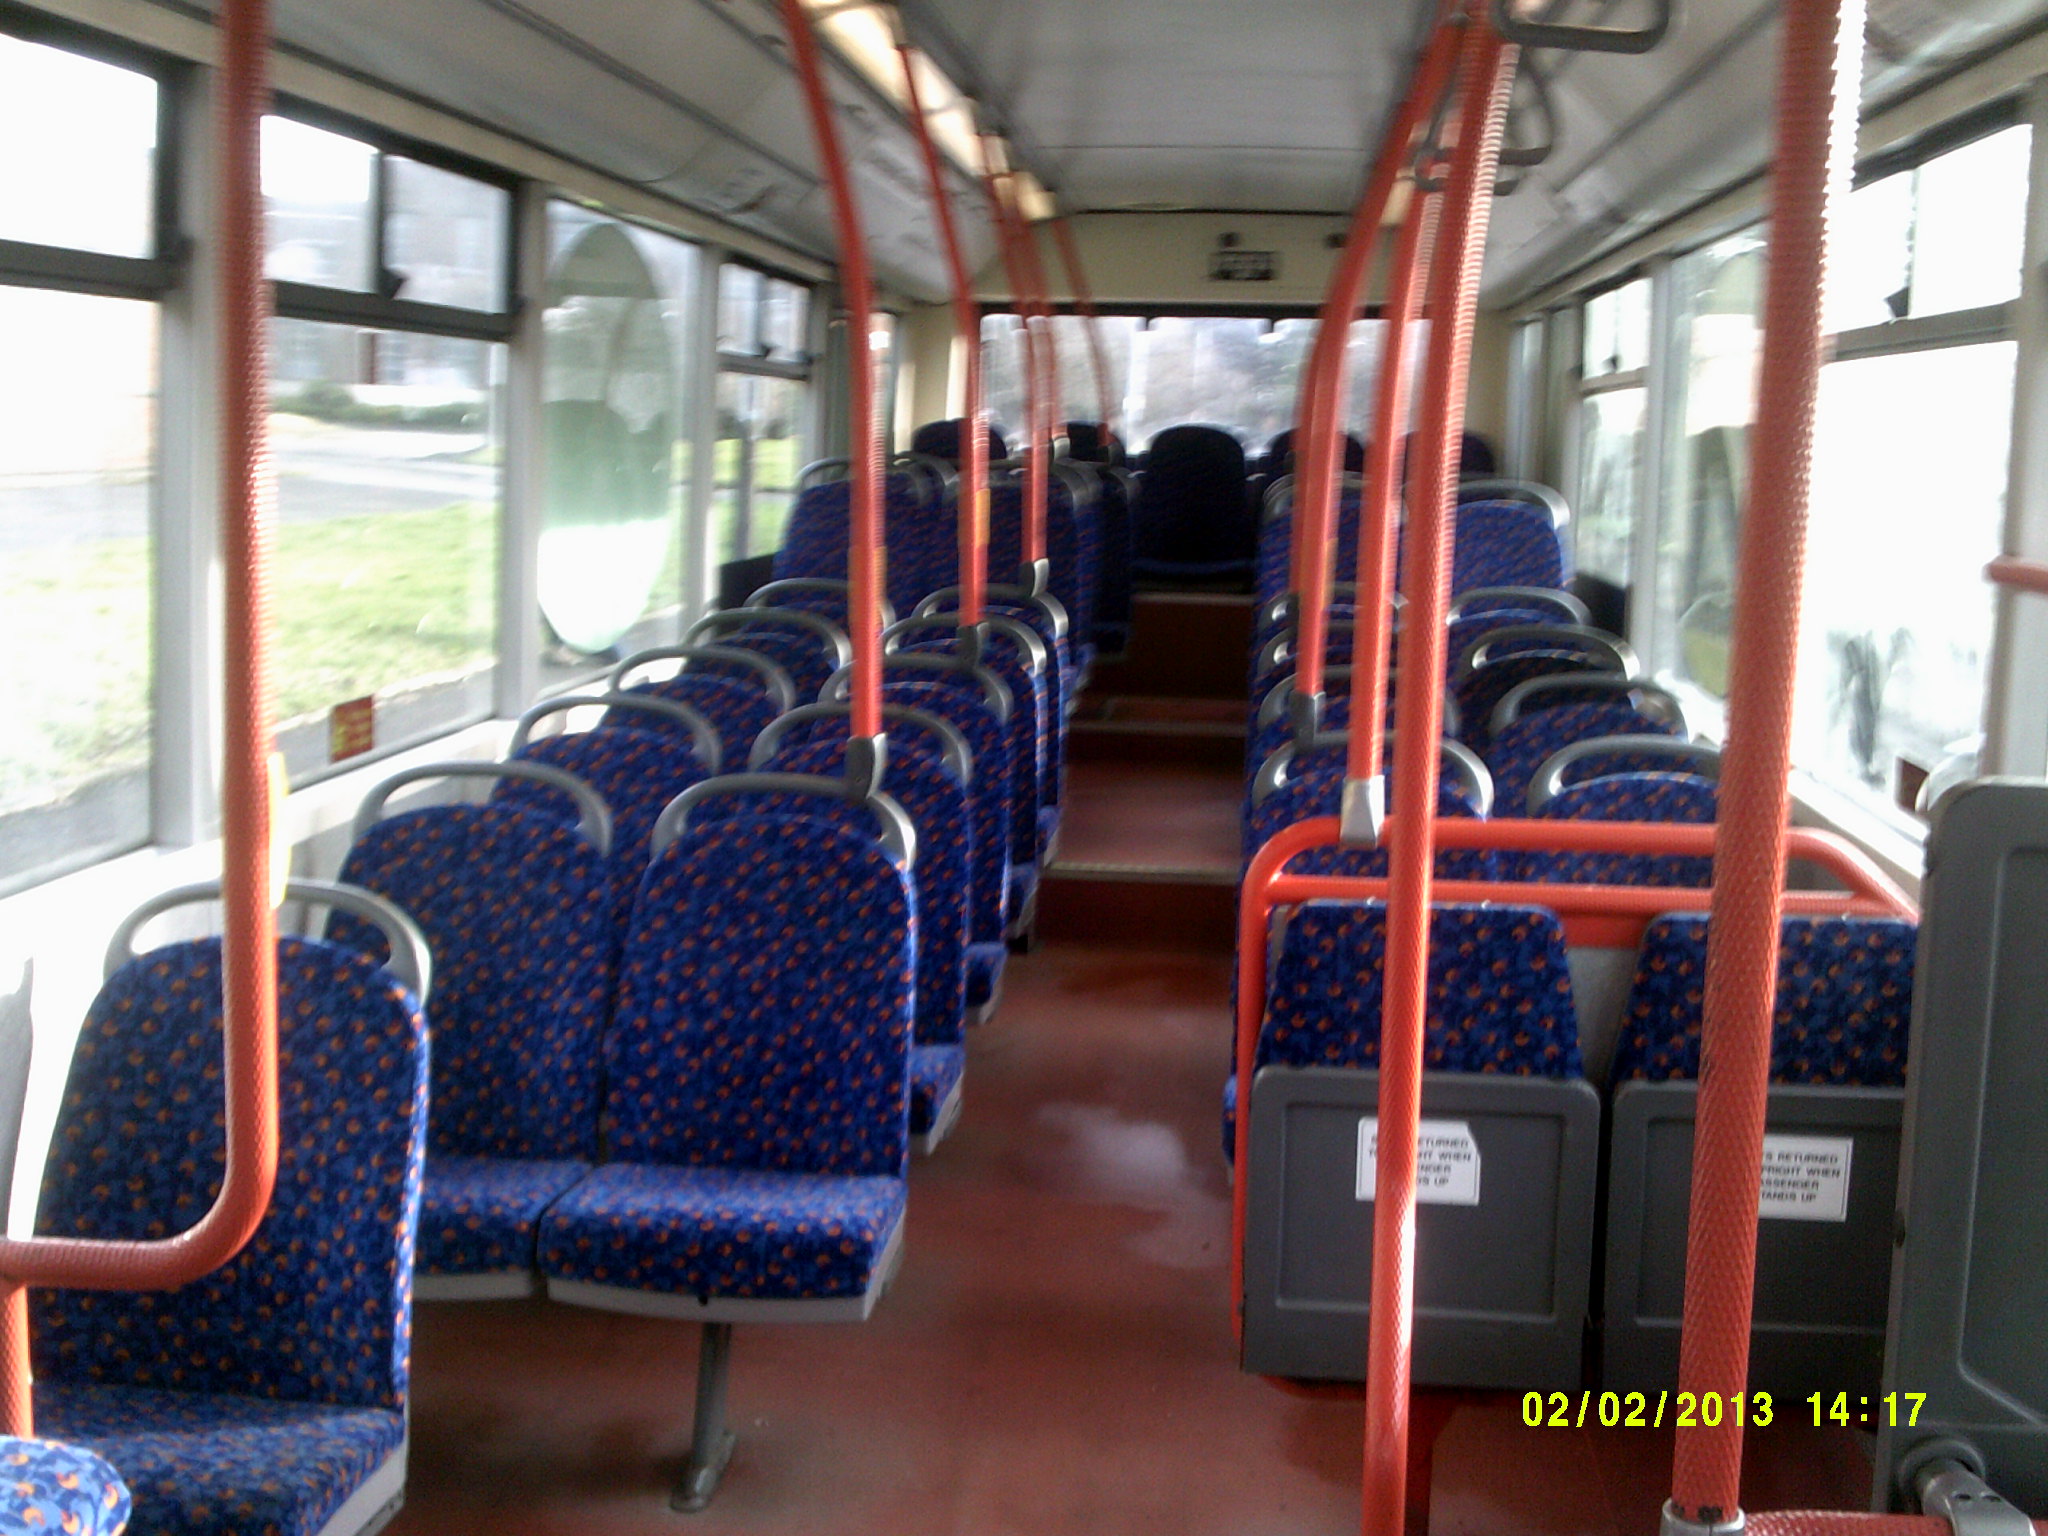 a bus with several seats that are open and empty